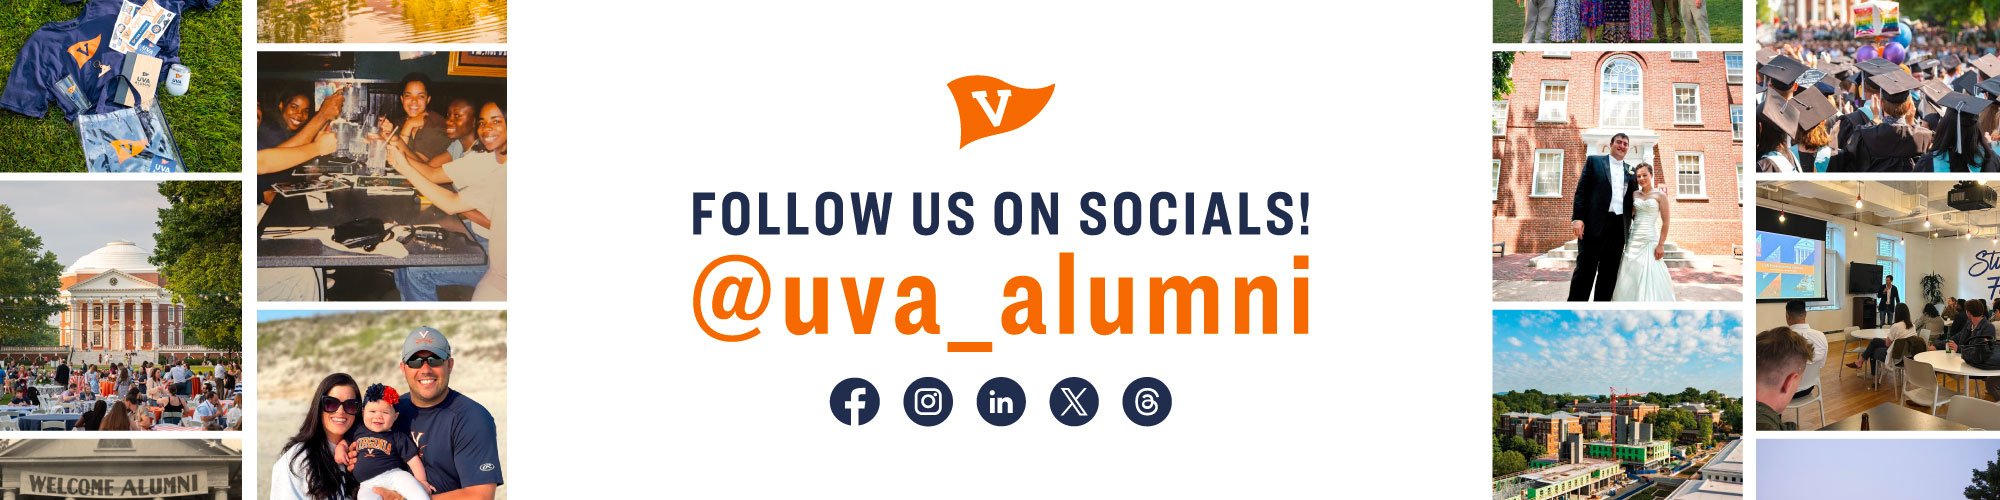 Get connected with what’s happening at your Alumni Association